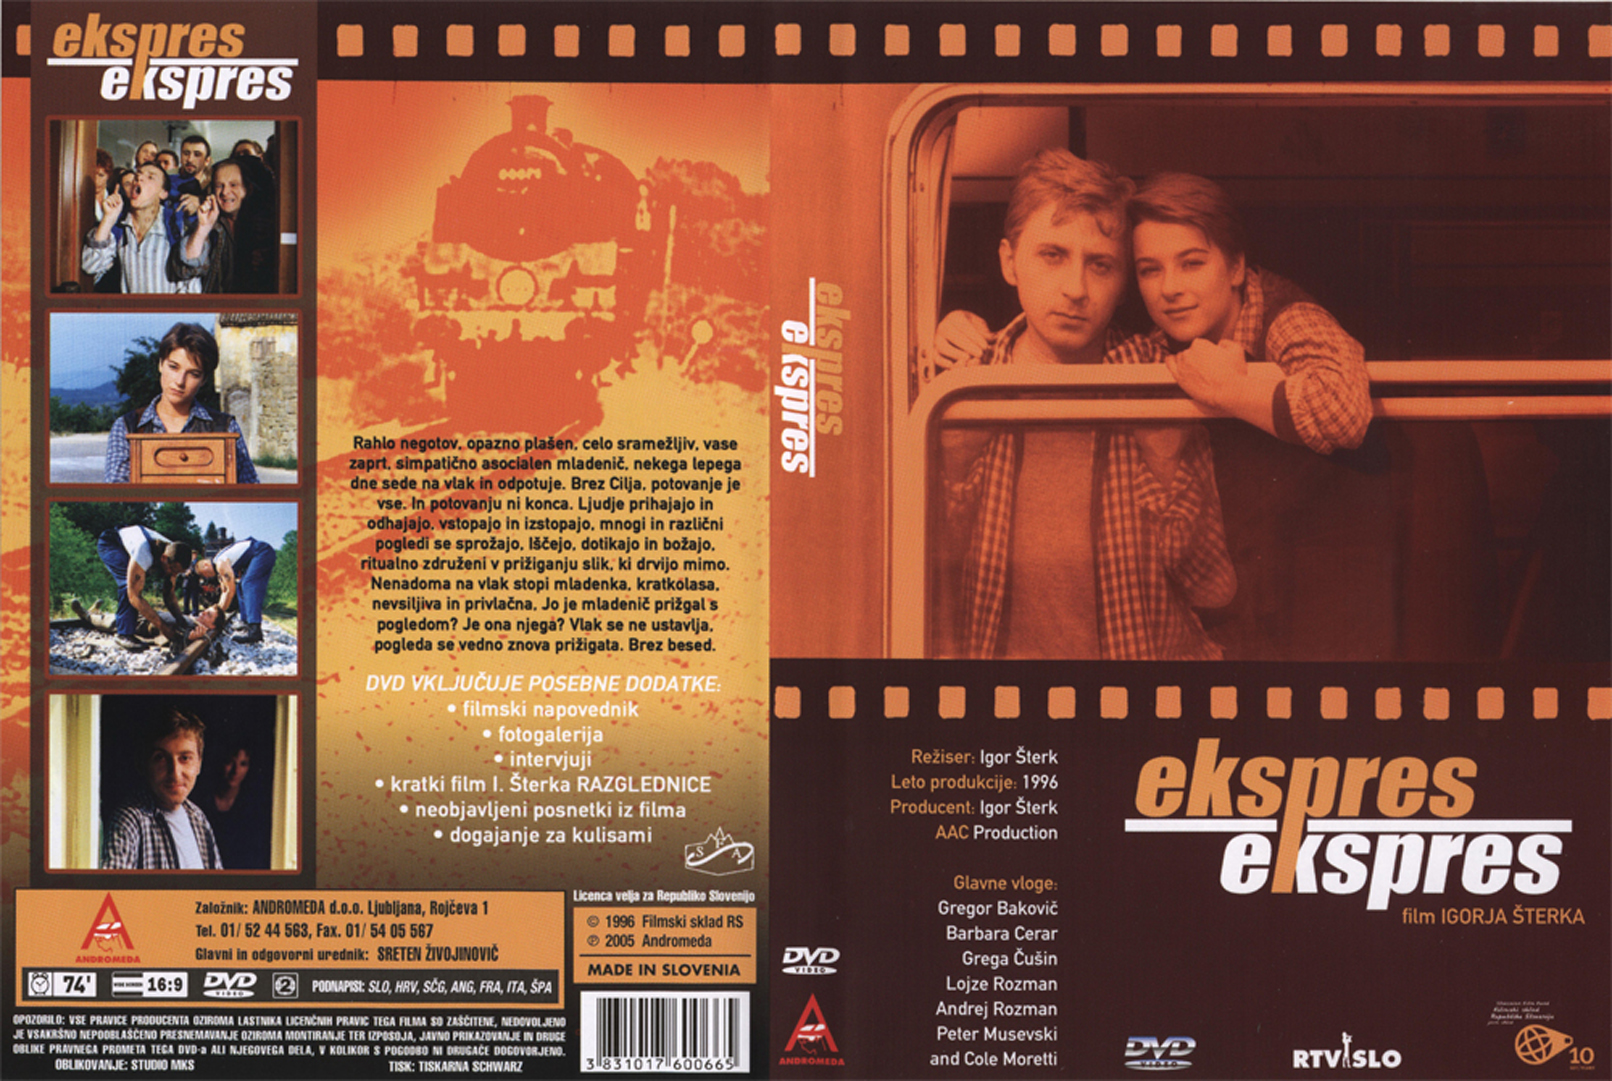 Click to view full size image -  DVD Cover - E - ekspres_ekspres_dvd - ekspres_ekspres_dvd.jpg